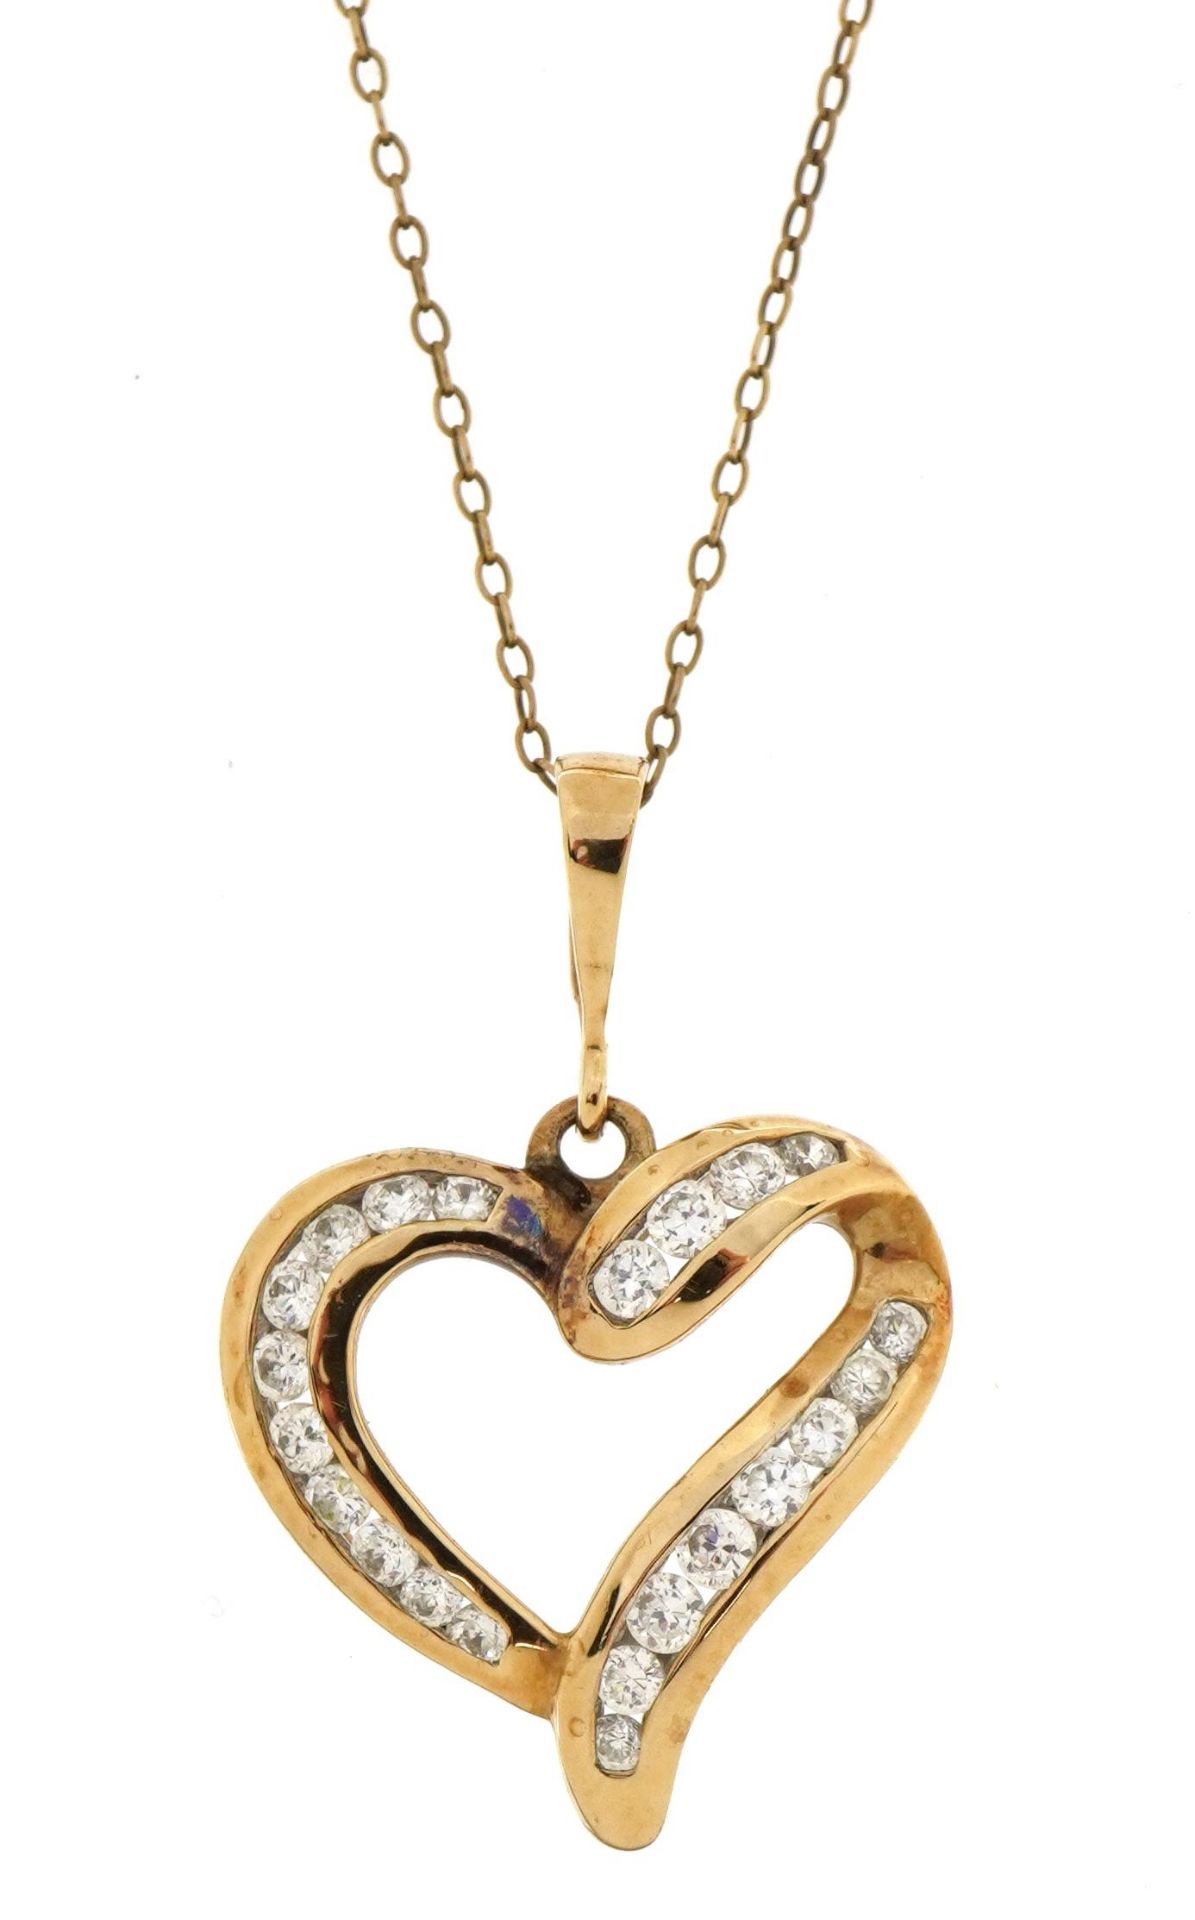 9ct gold clear stone love heart pendant on a 9ct gold Belcher link necklace, 3.2cm high and 48cm